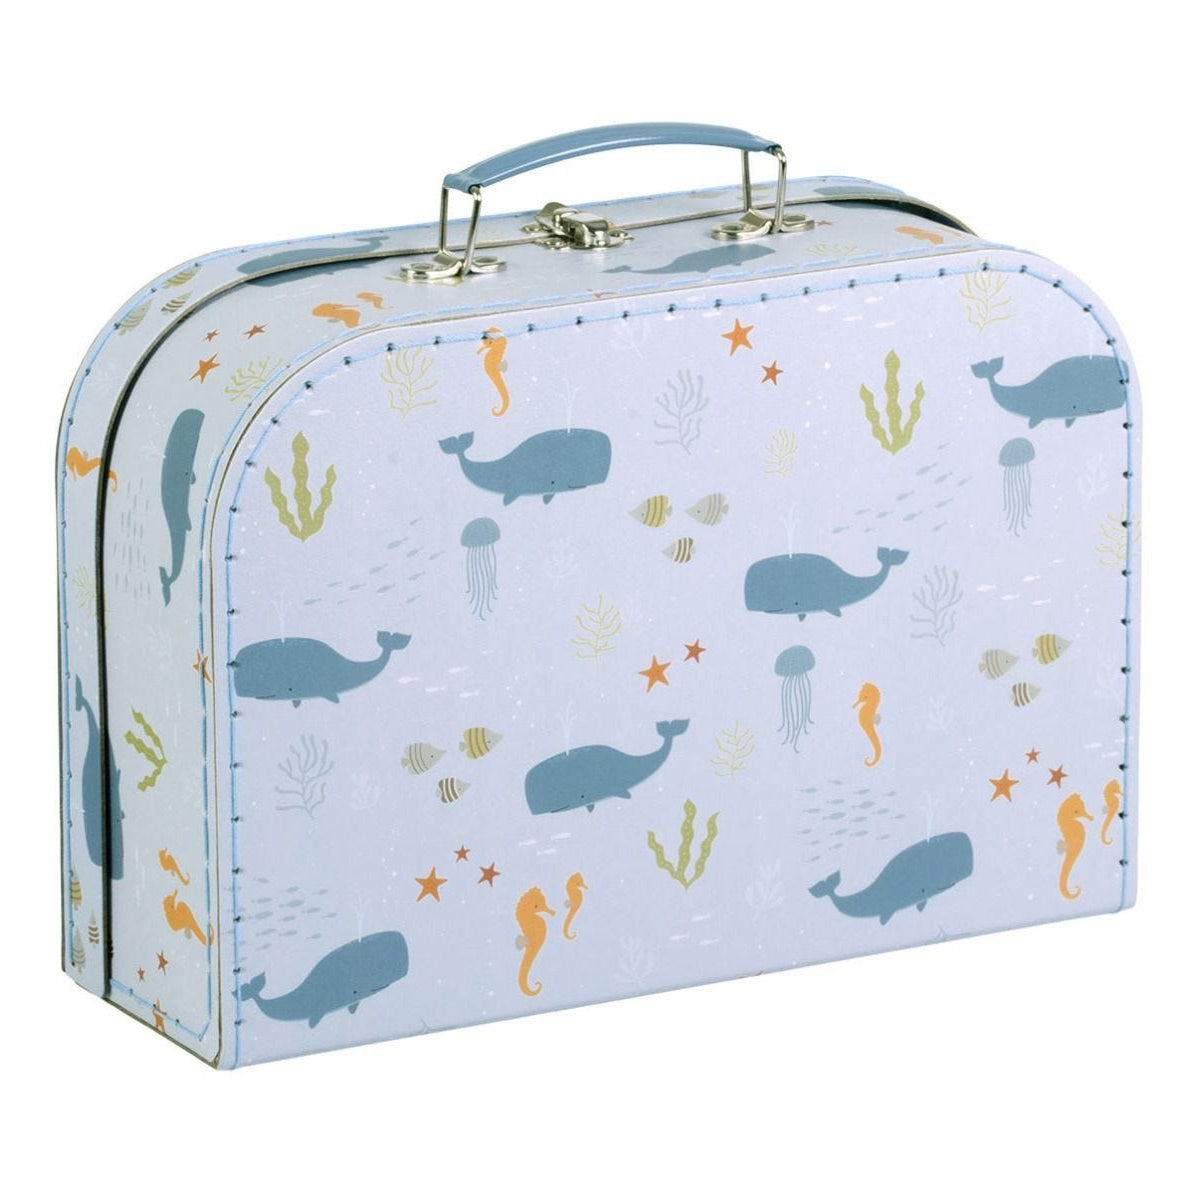 a-little-lovely-company-suitcase-set-ocean- (3)